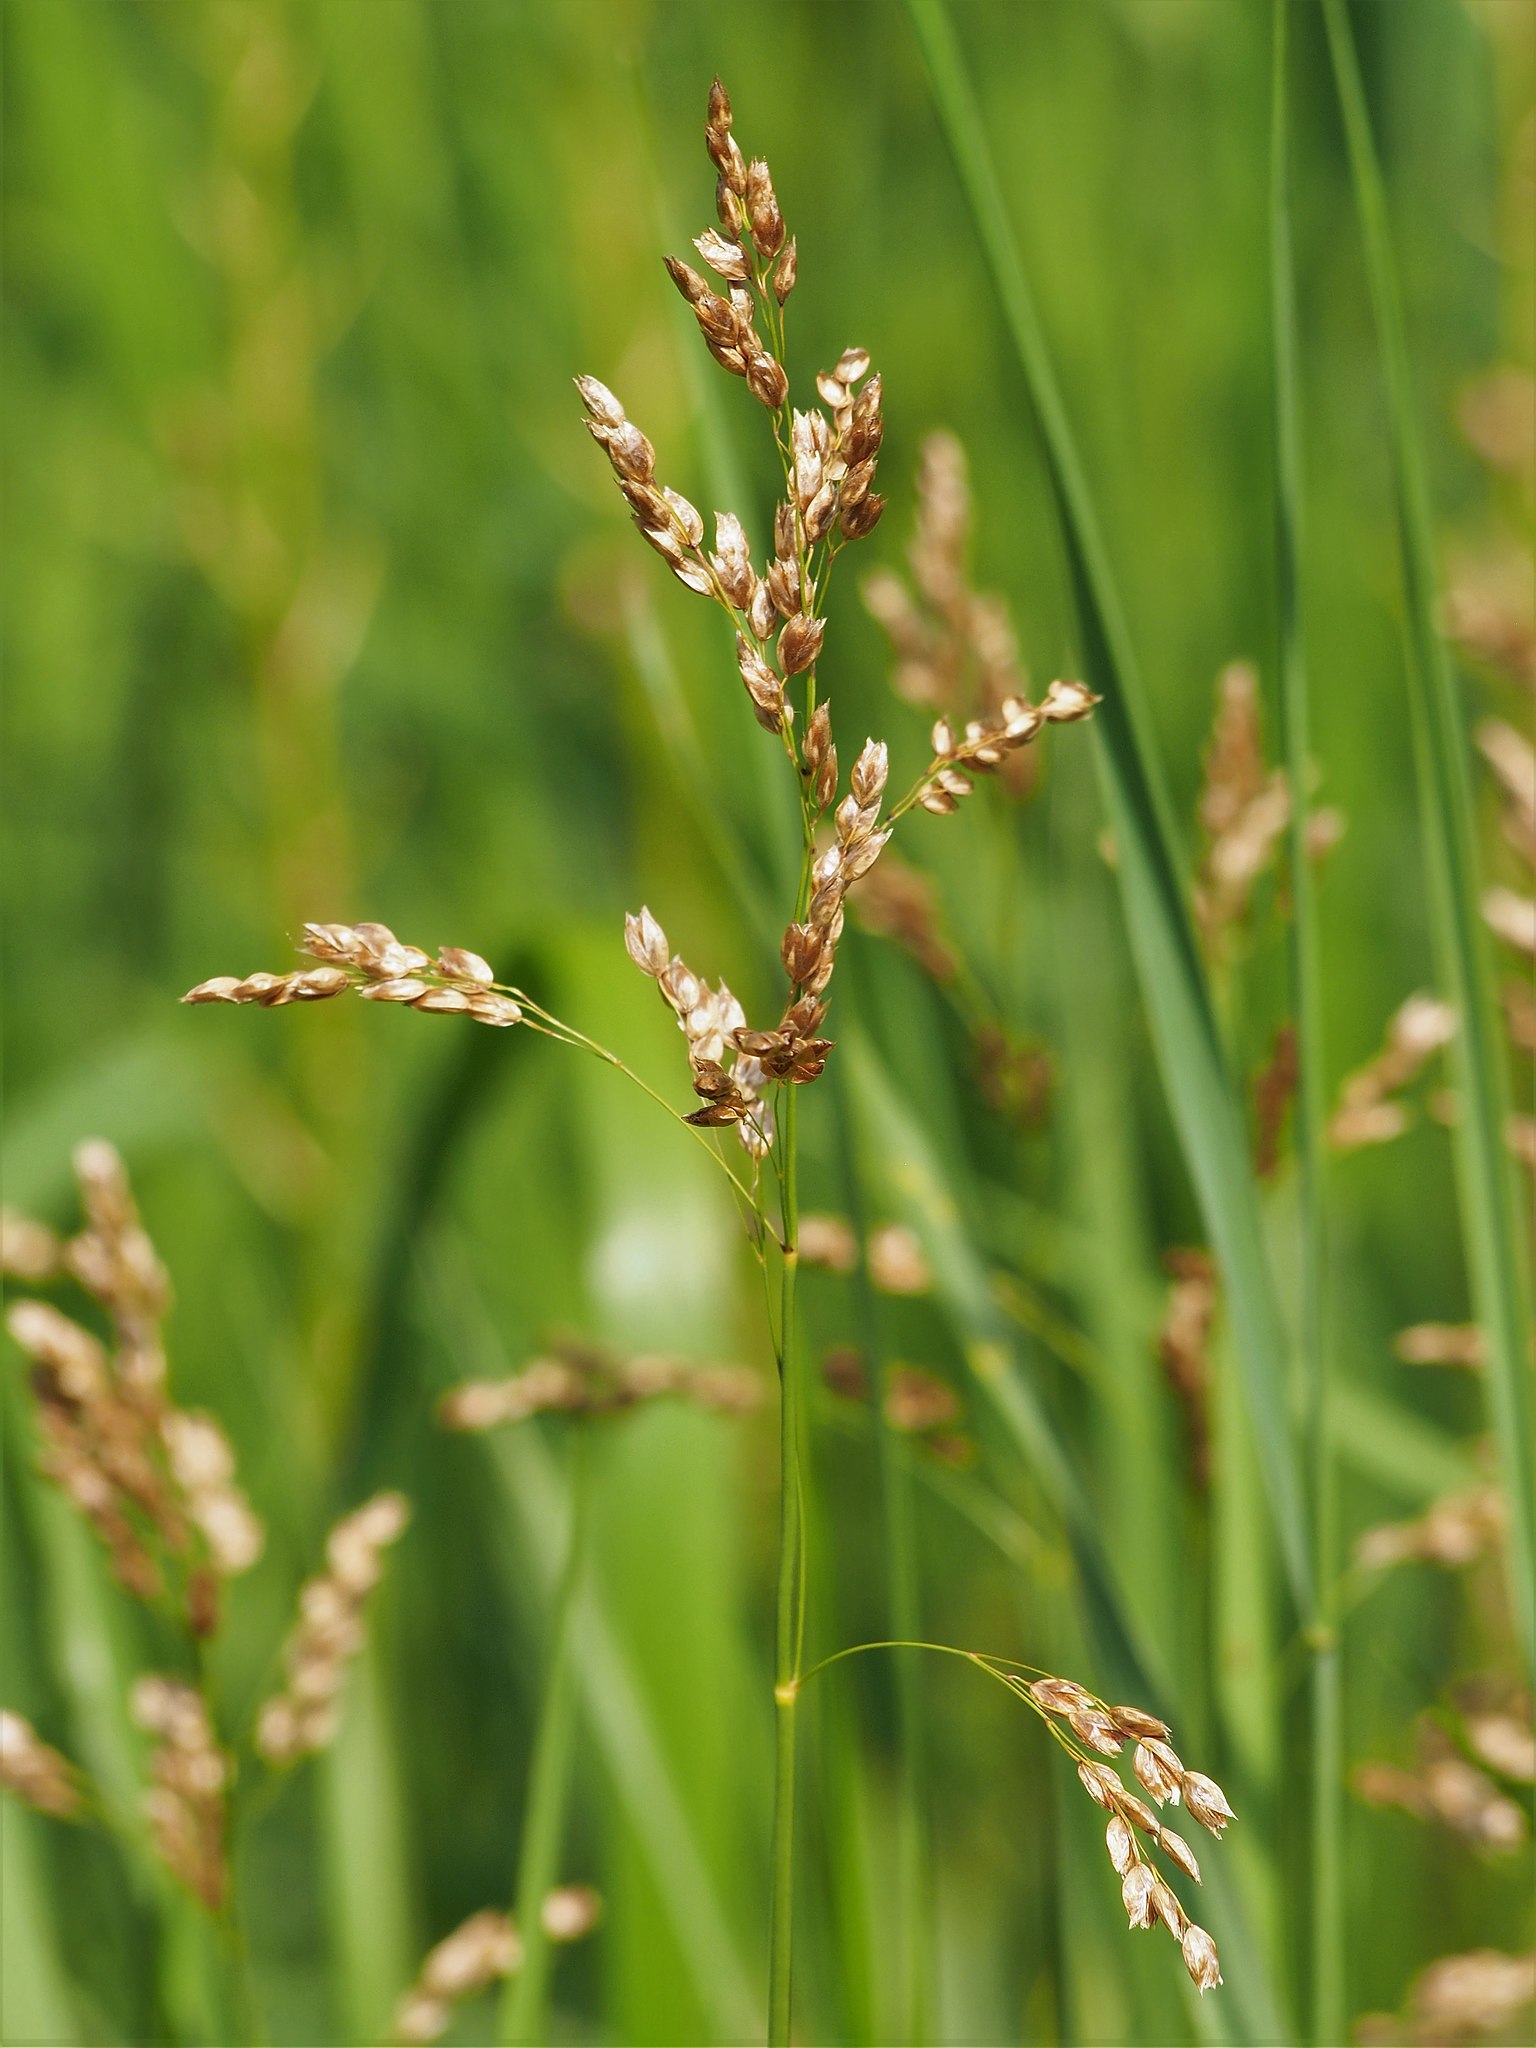 Photograph of an inflorscence of sweet grass. Its pleasant aroma makes it a common ornamental grass today.